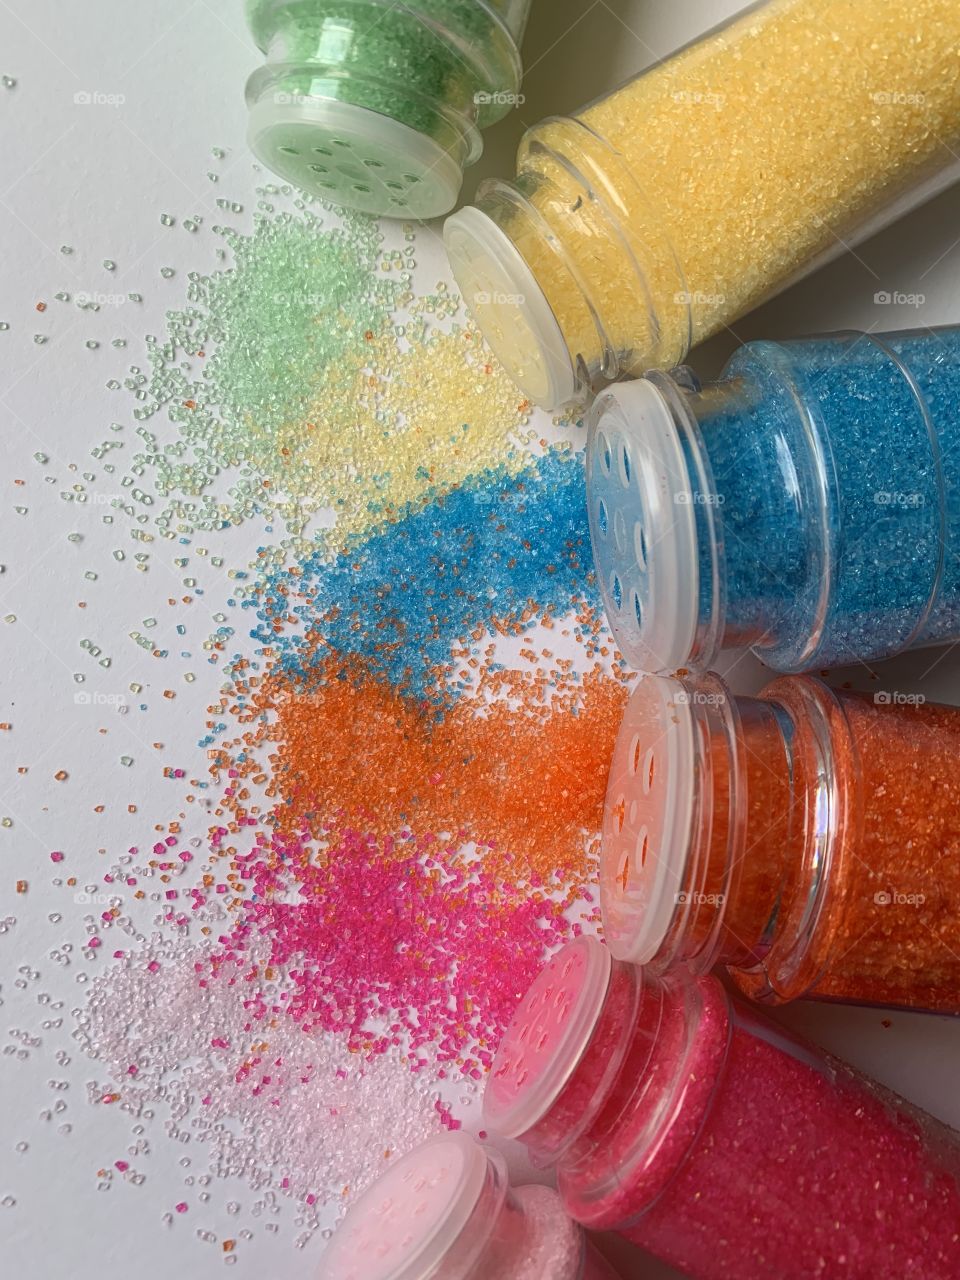 Bright colored sugar sprinkles spilling out of their bottles onto a white surface